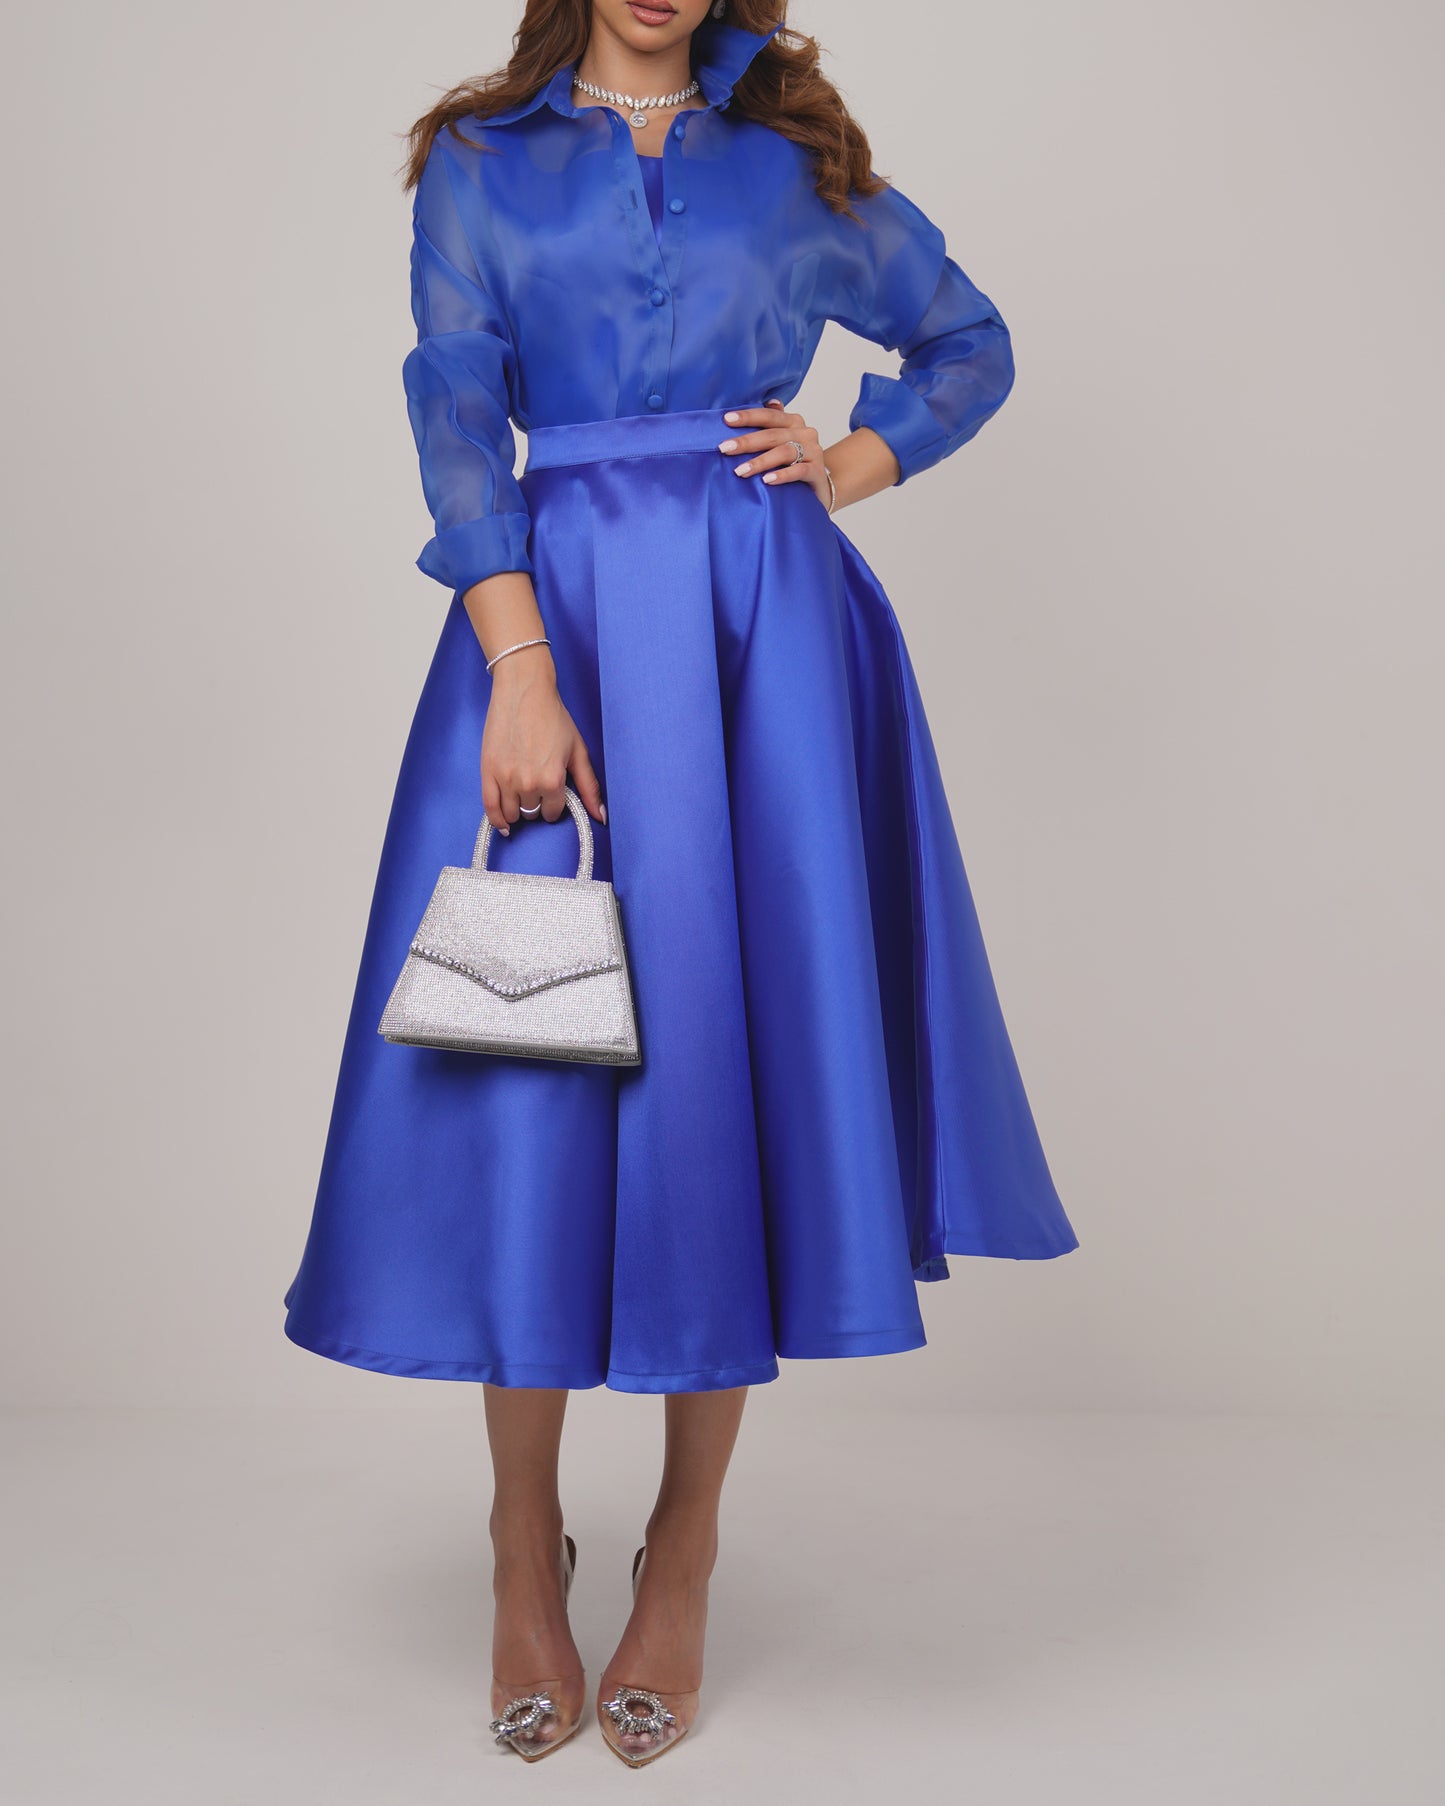 Sheer shirt with satin bodice and flared midi skirt in royal blue